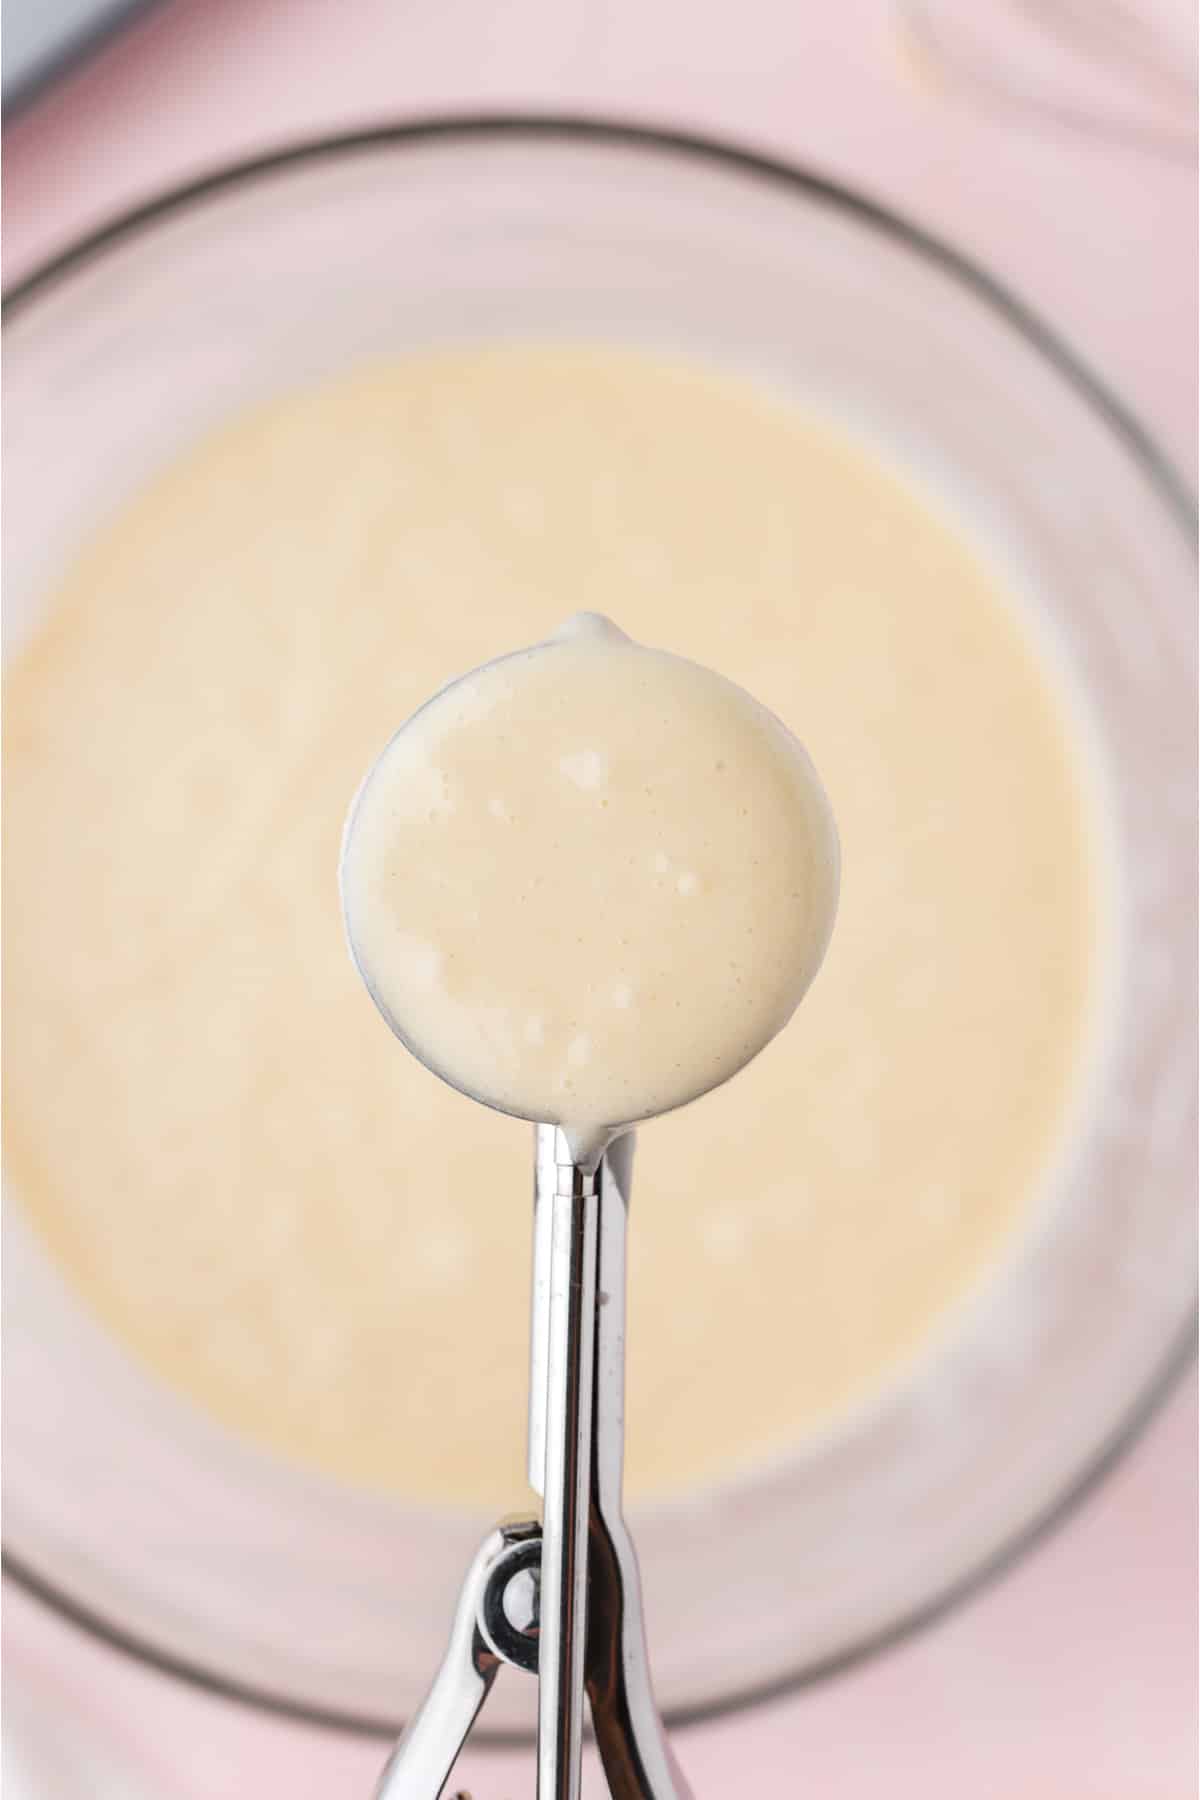 A scoop filled with batter over the bowl of cupcake batter.